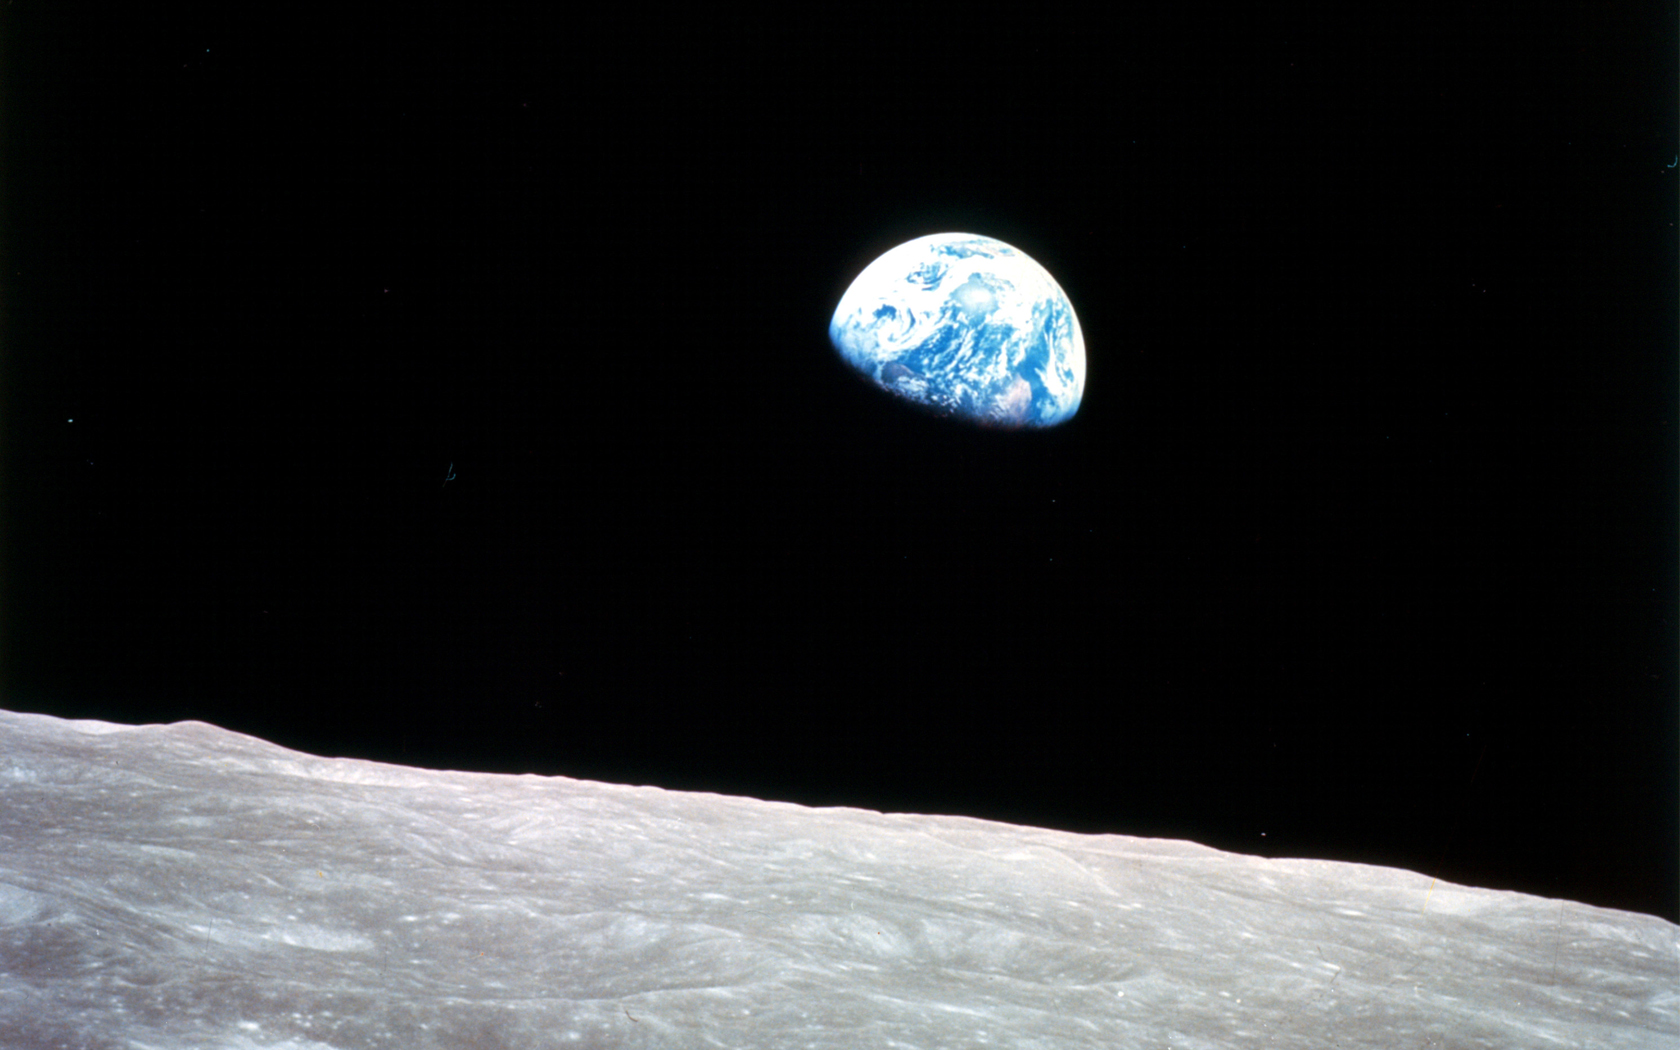 change desktop background to nasa picture of the day